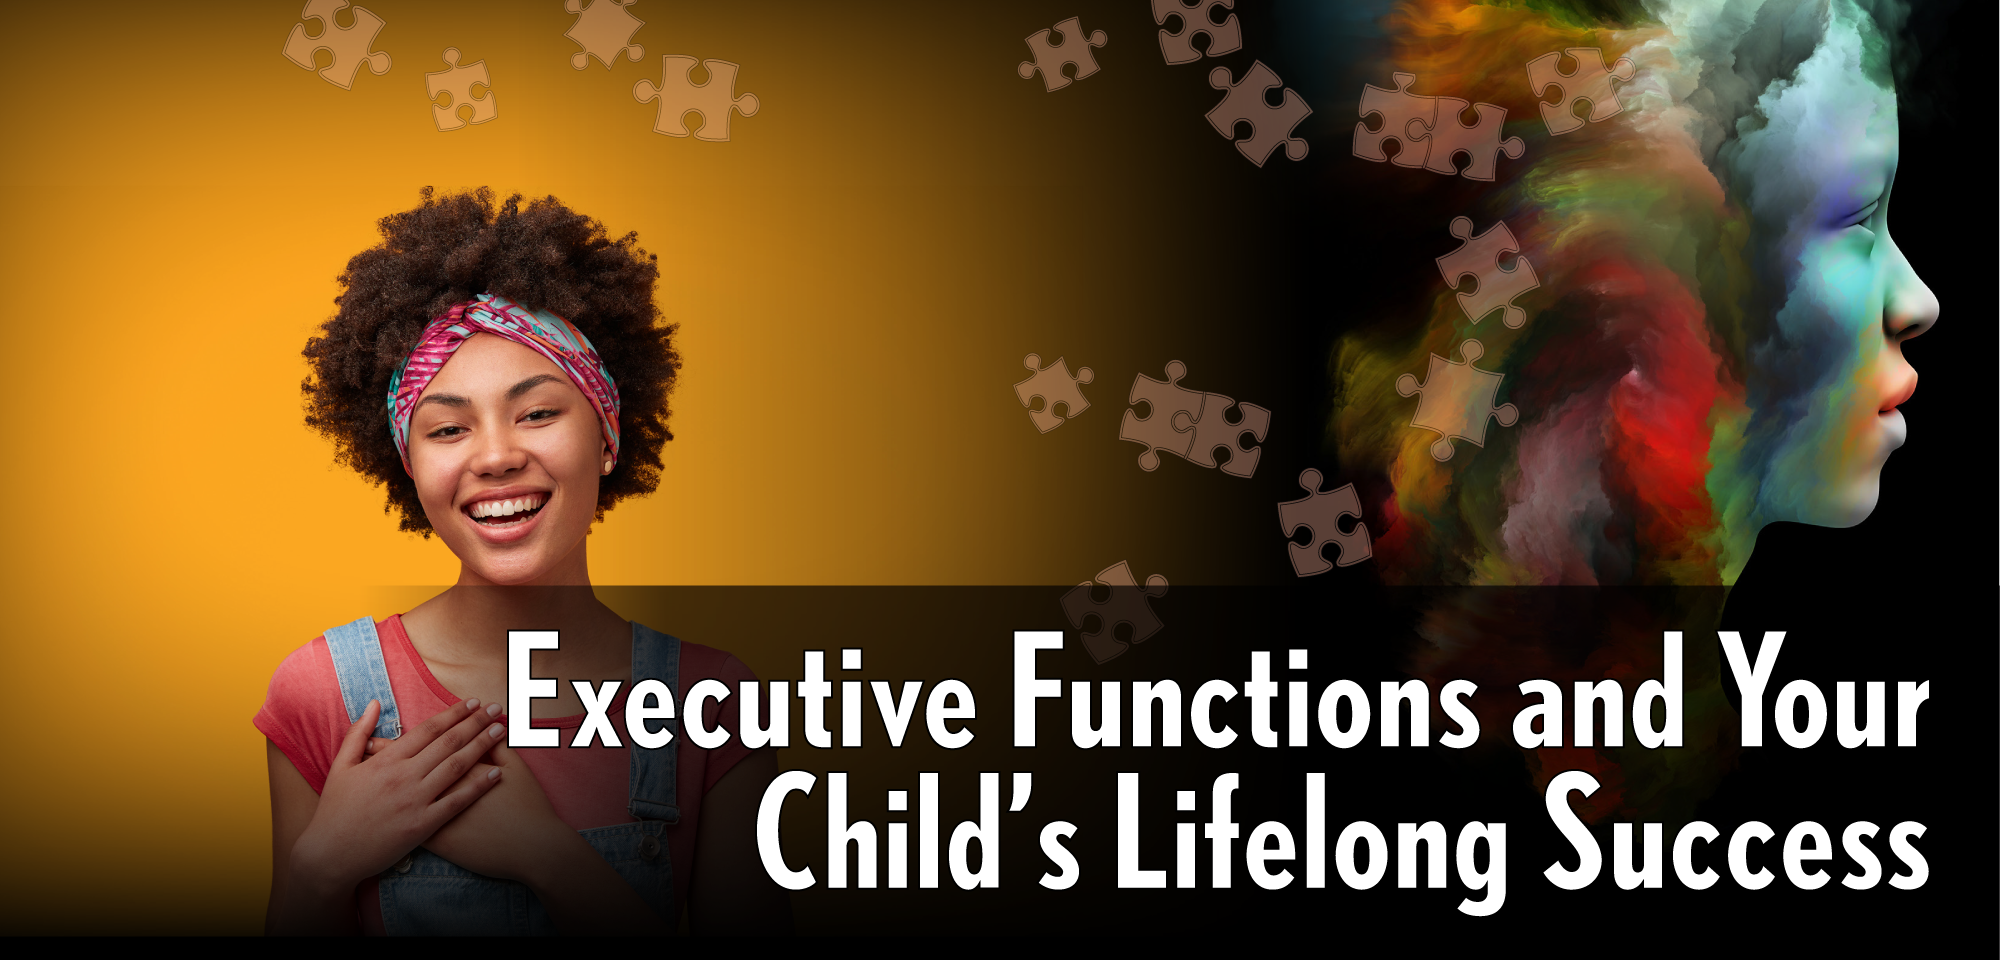 Executive Functions and Your Child's Lifelong Success